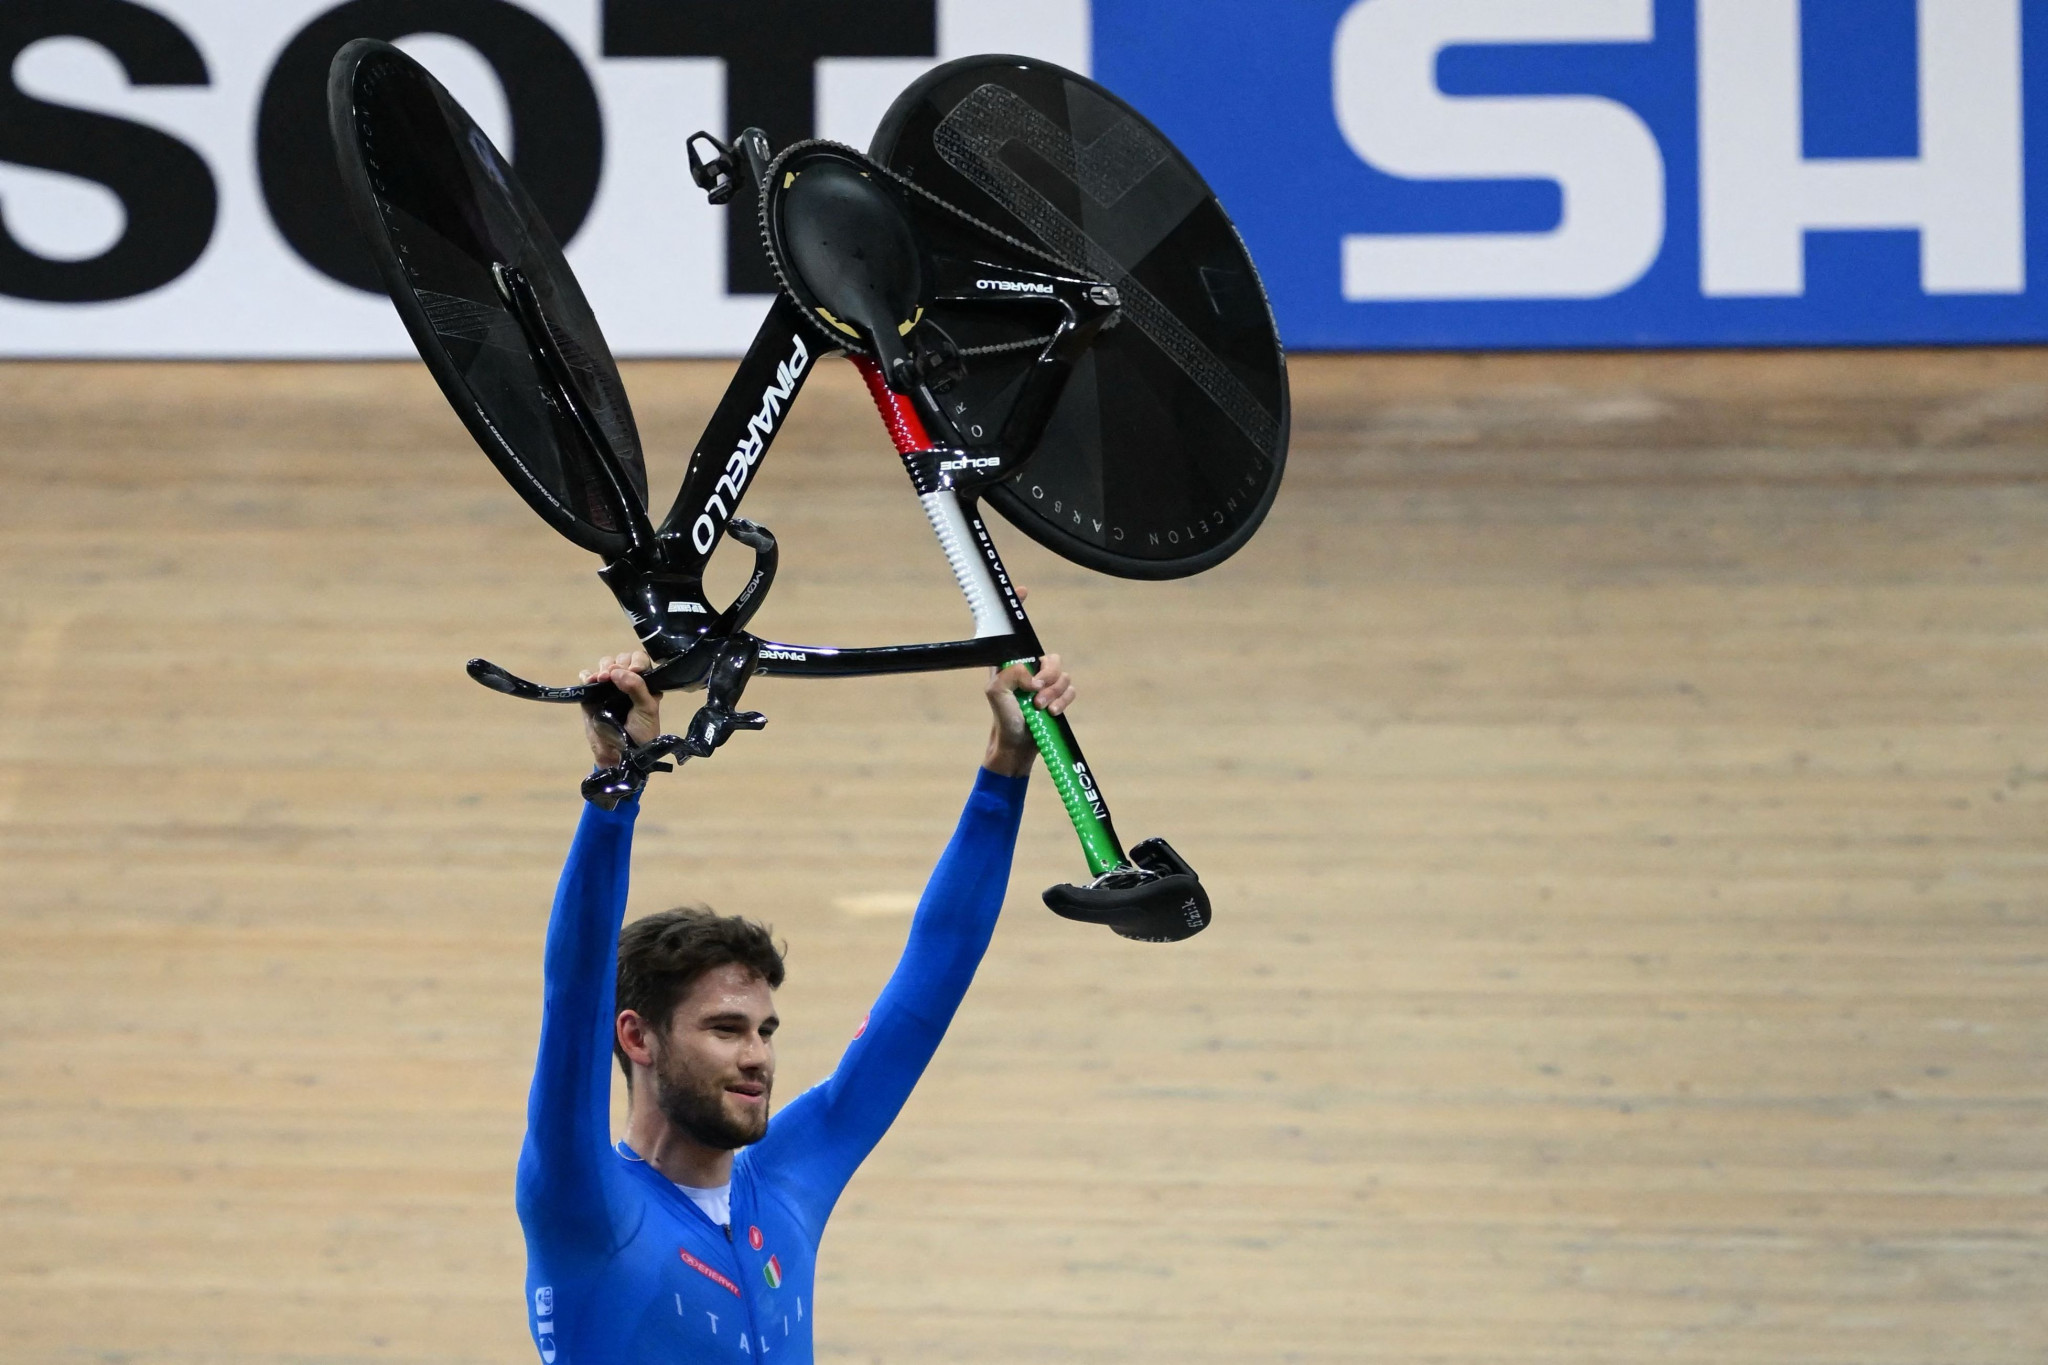 Ganna takes men’s individual pursuit crown in world record at Track Cycling World Championships